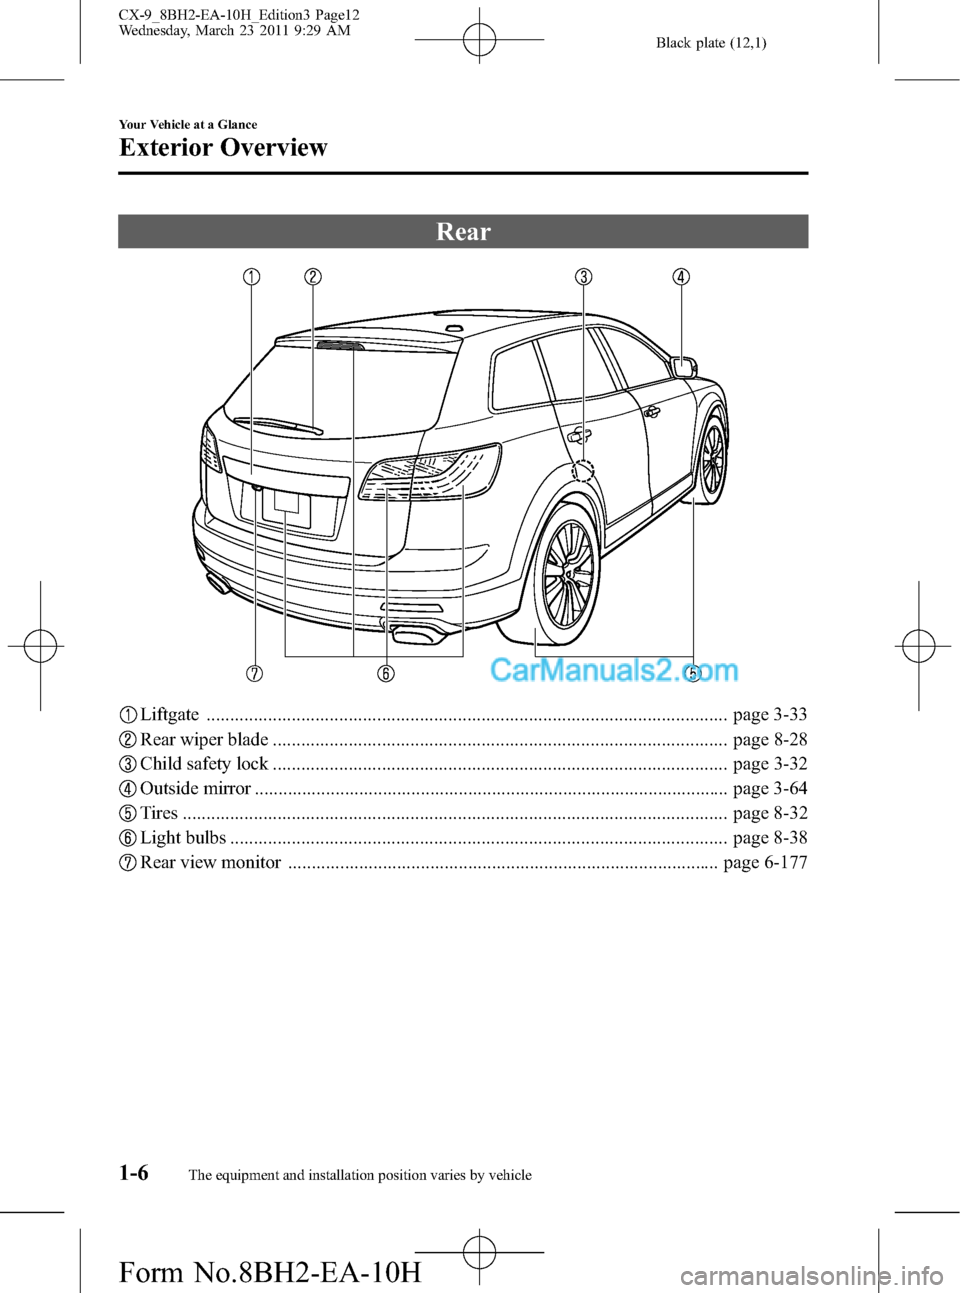 MAZDA MODEL CX-9 2011  Owners Manual (in English) Black plate (12,1)
Rear
Liftgate .............................................................................................................. page 3-33
Rear wiper blade .............................